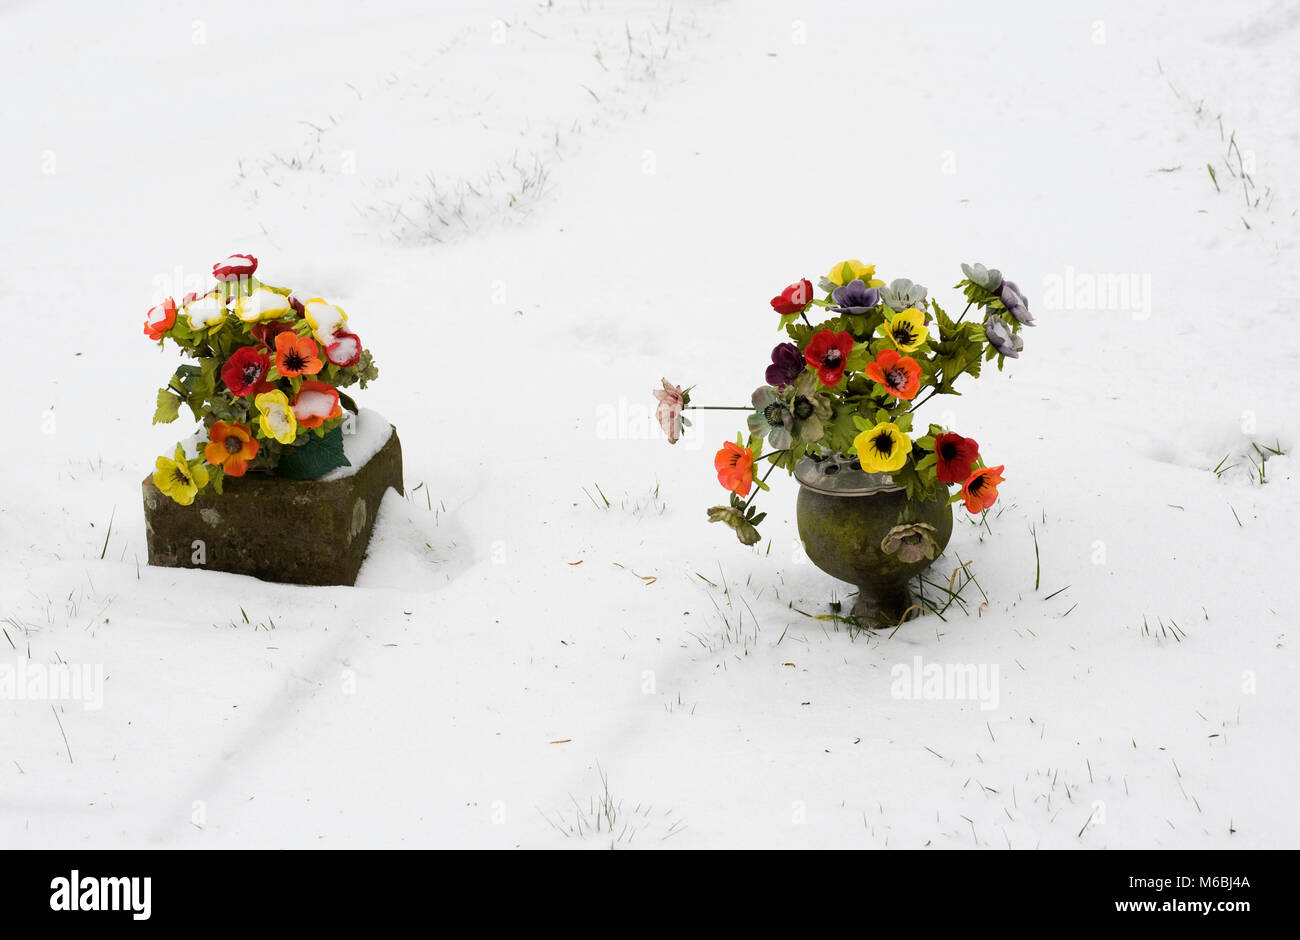 Silk flowers on graves in winter. Stock Photo